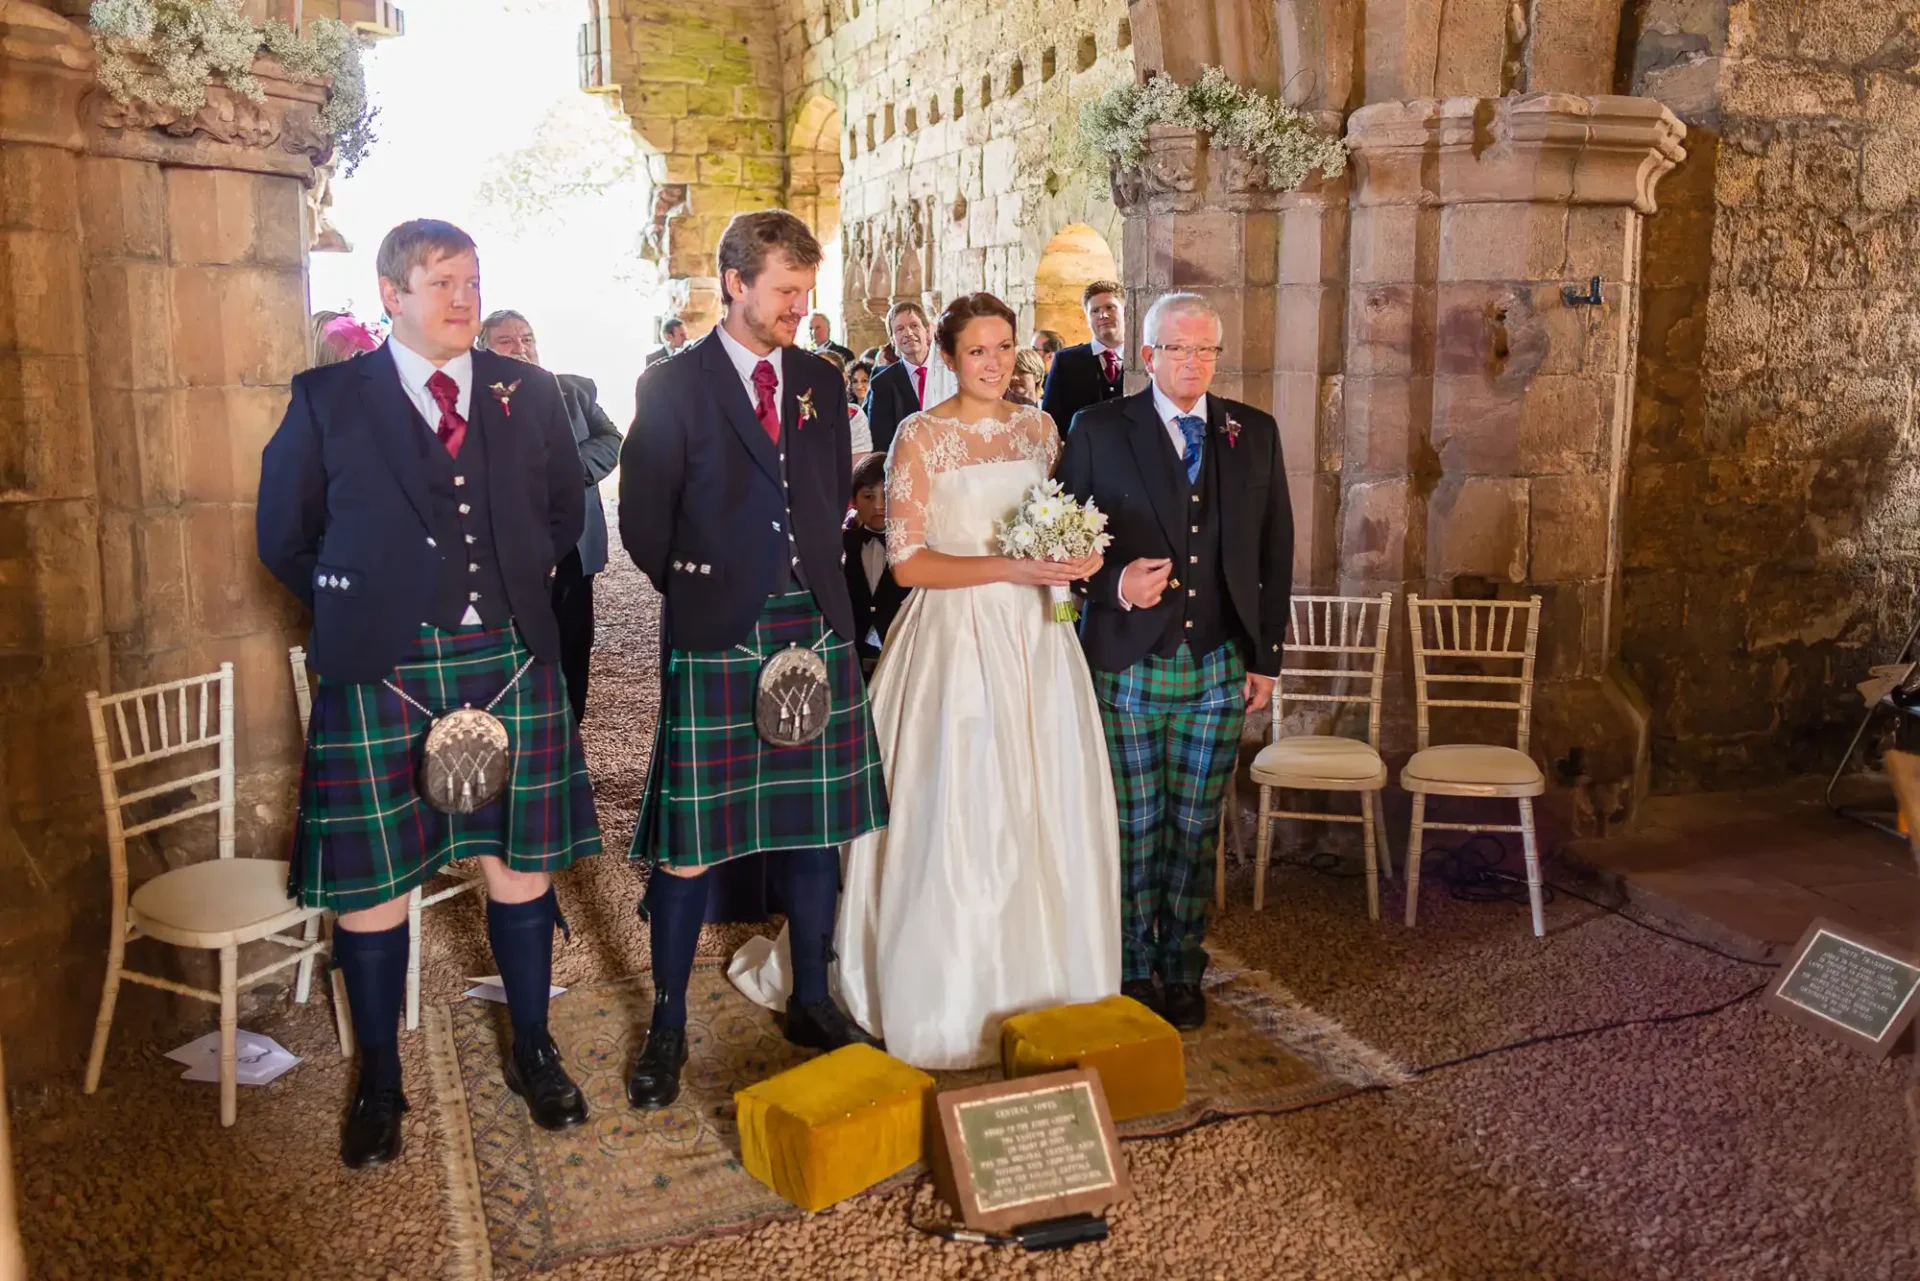 A wedding ceremony inside a historic stone building with the bride and groom walking down the aisle, accompanied by men in traditional kilts.